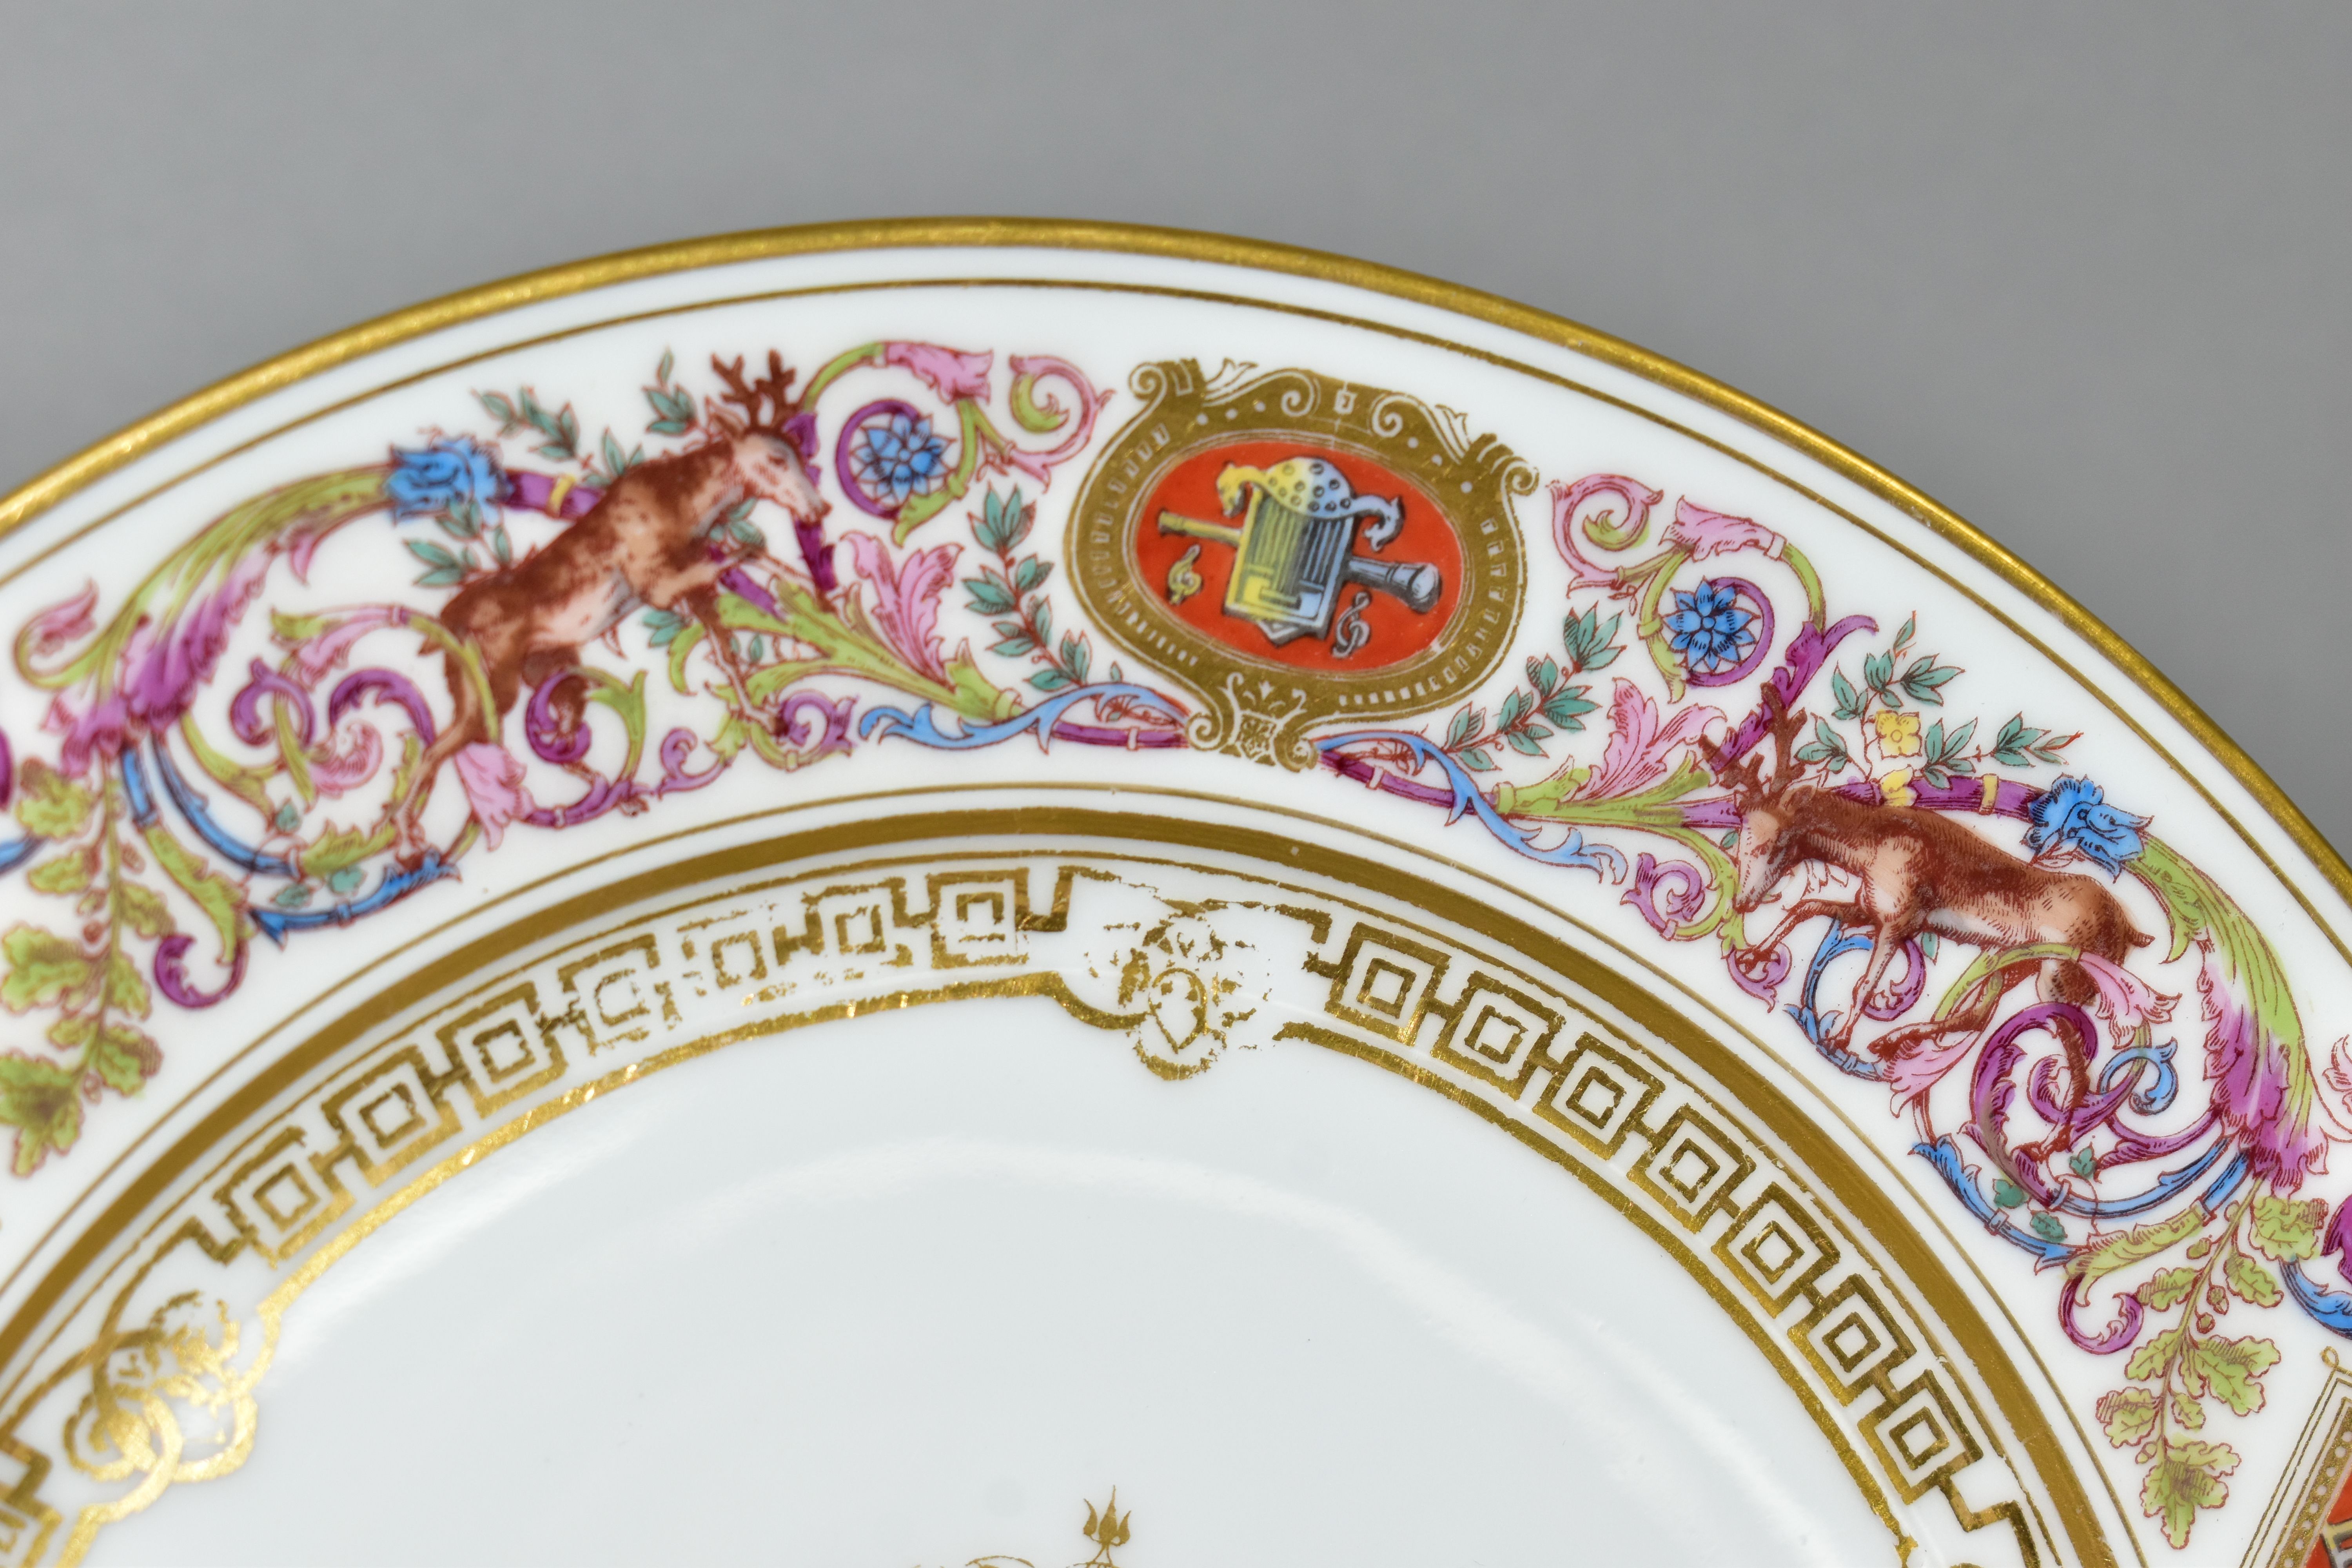 A SEVRES PORCELAIN DESSERT PLATE, from the Royal Hunting Service, featuring a scrolling border - Image 3 of 9